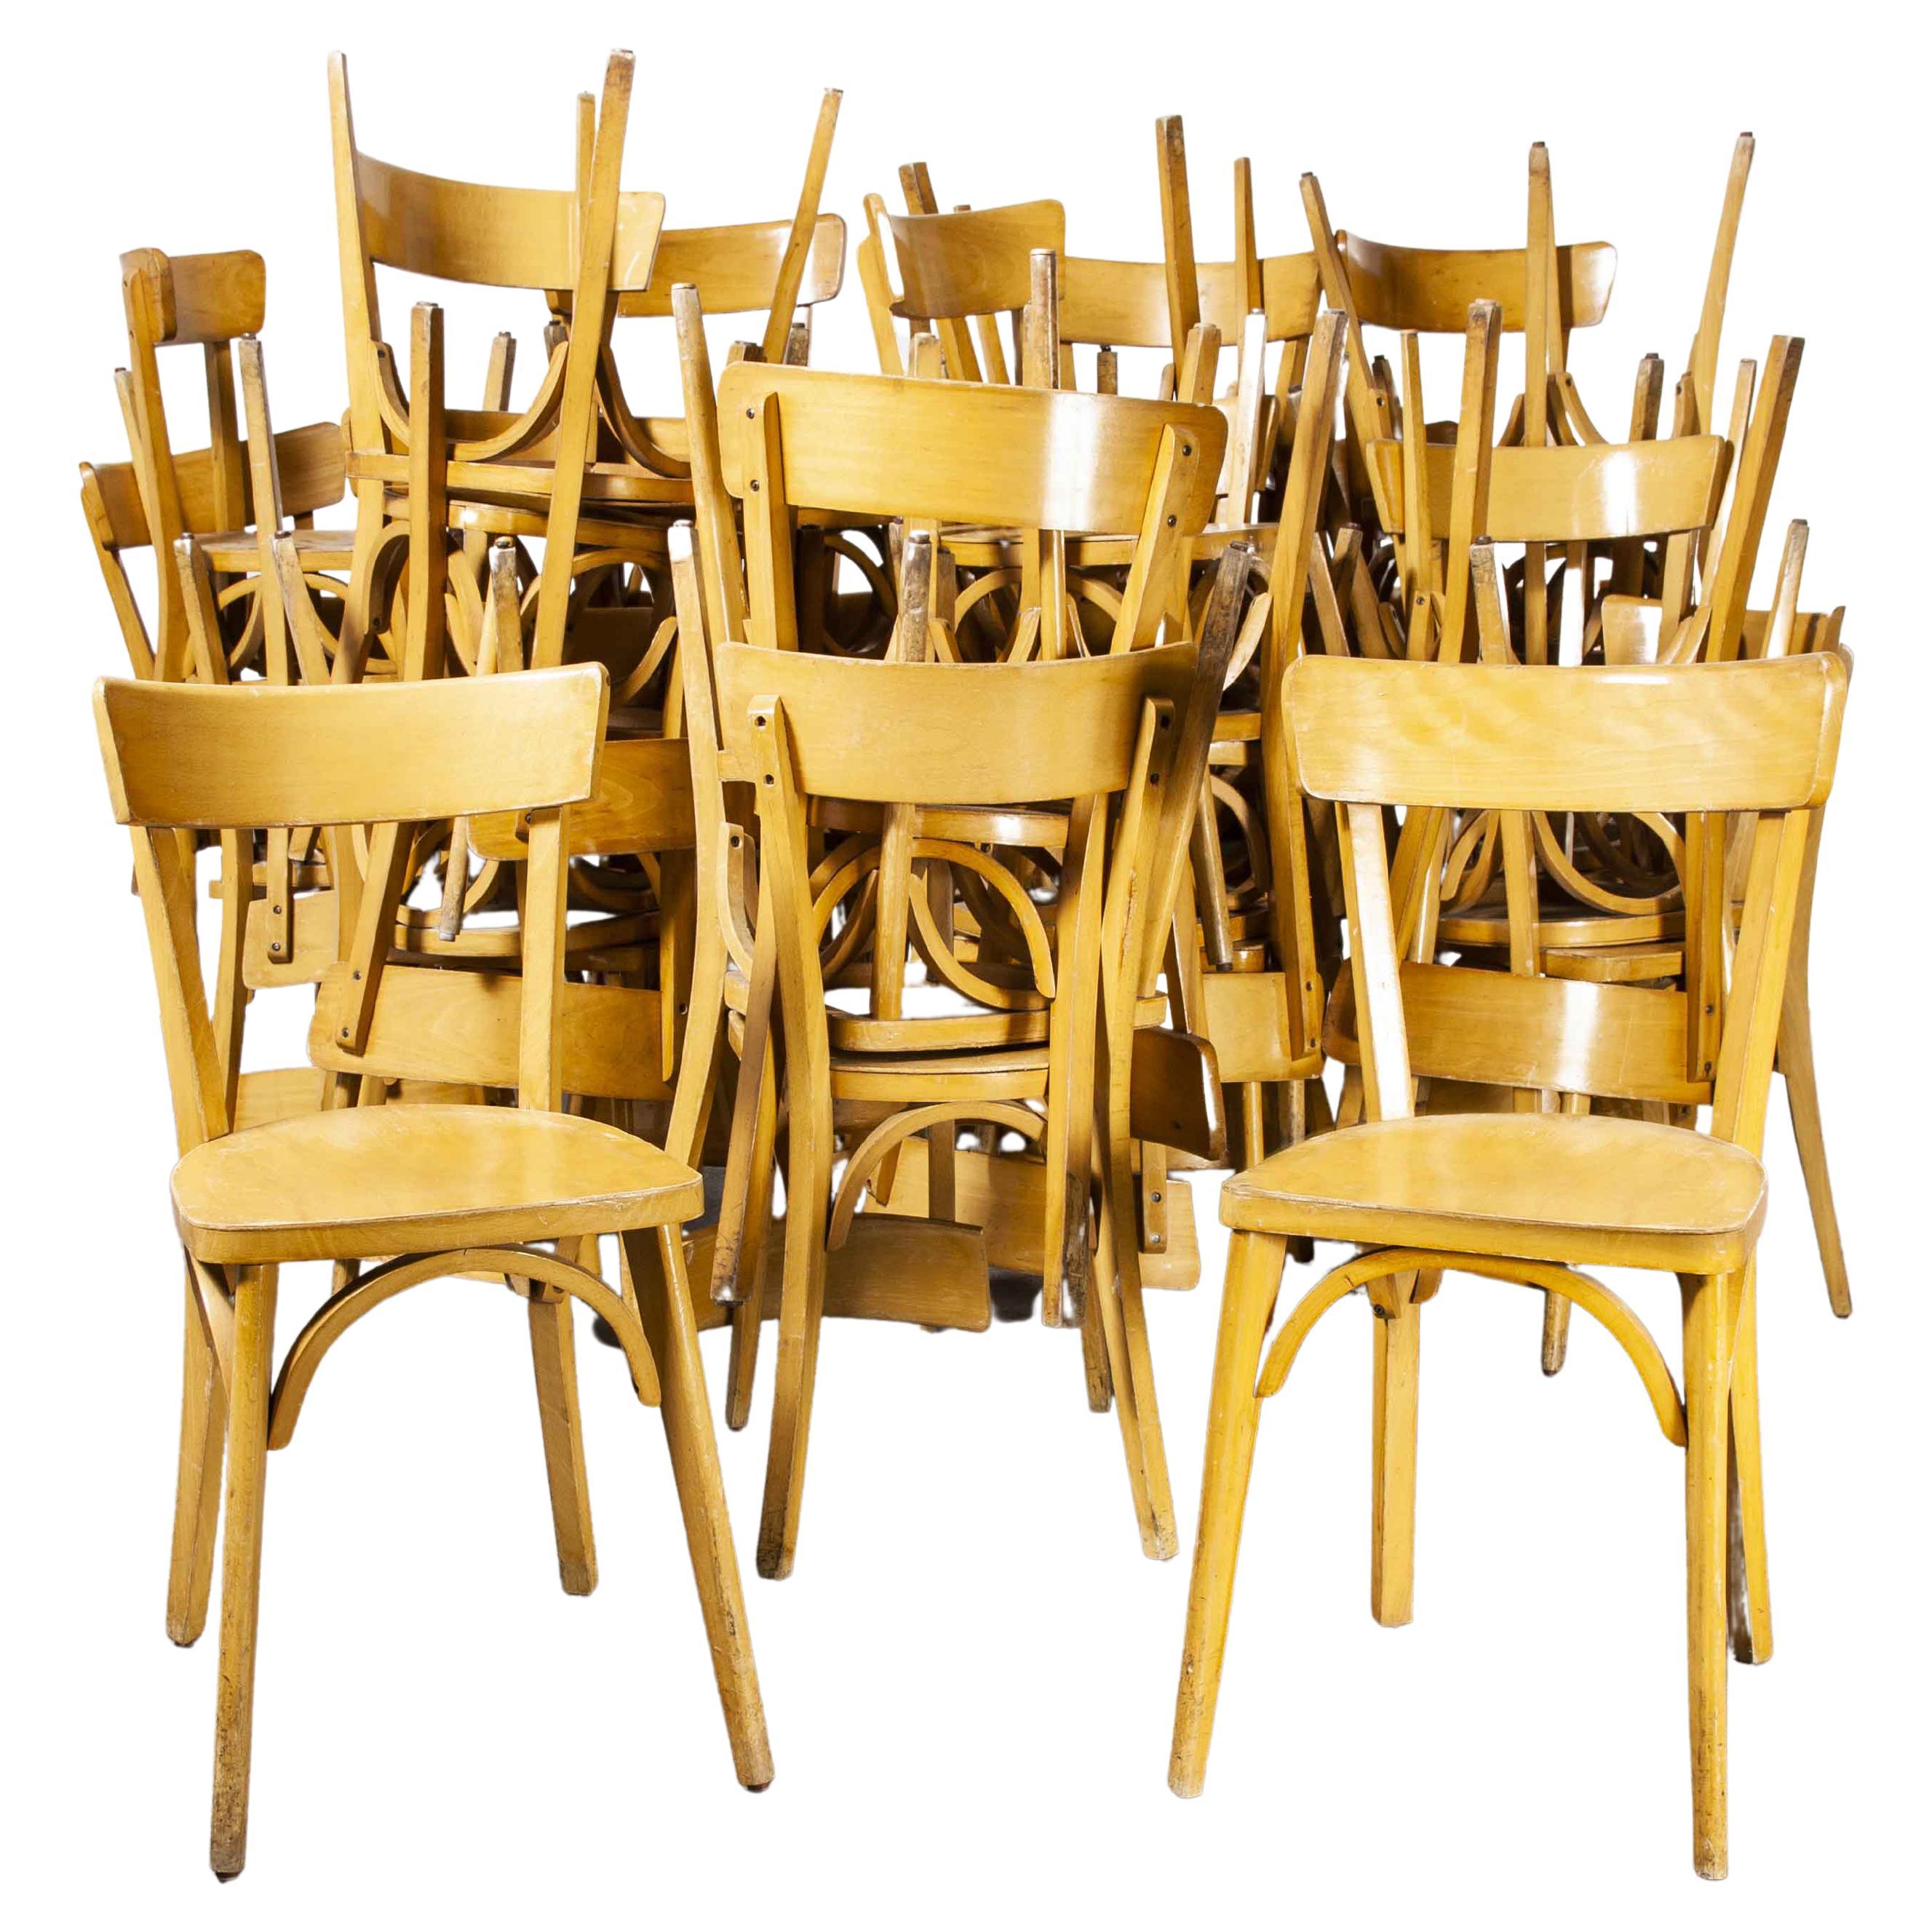 1950's French Made Luterma Bentwood Dining Chairs, Various Qty Available